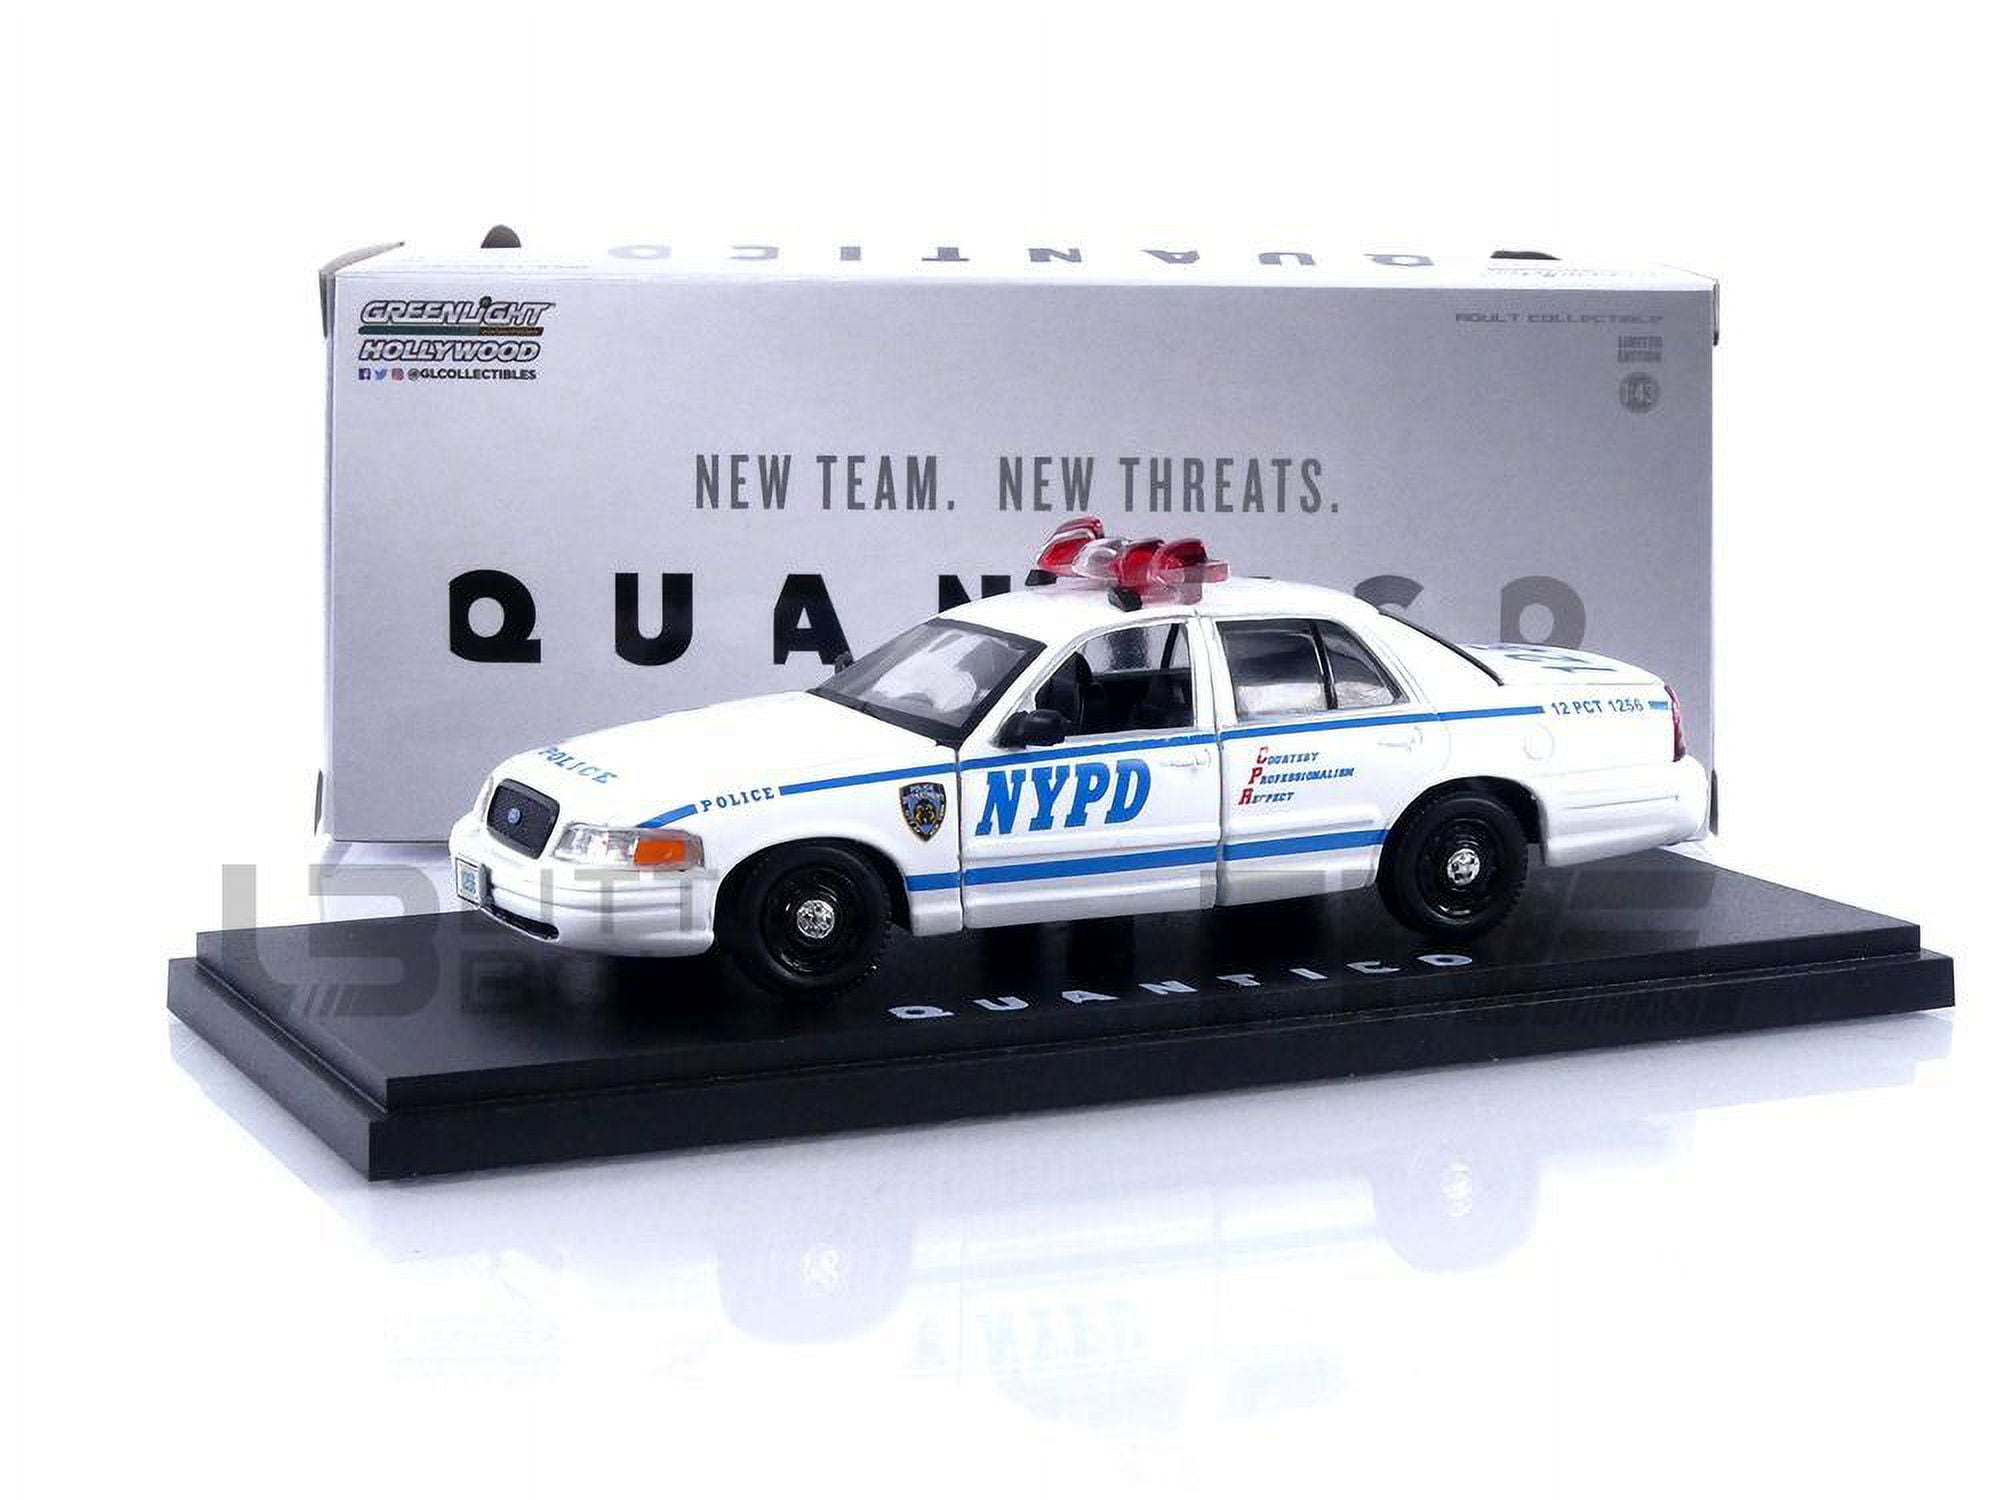 86633 2003 Ford Crown Victoria Police Interceptor NYPD New York City Police Dept Quantico 2015-2018 TV Series 1 by 43 Scale Diecast Model Car, White -  GreenLight